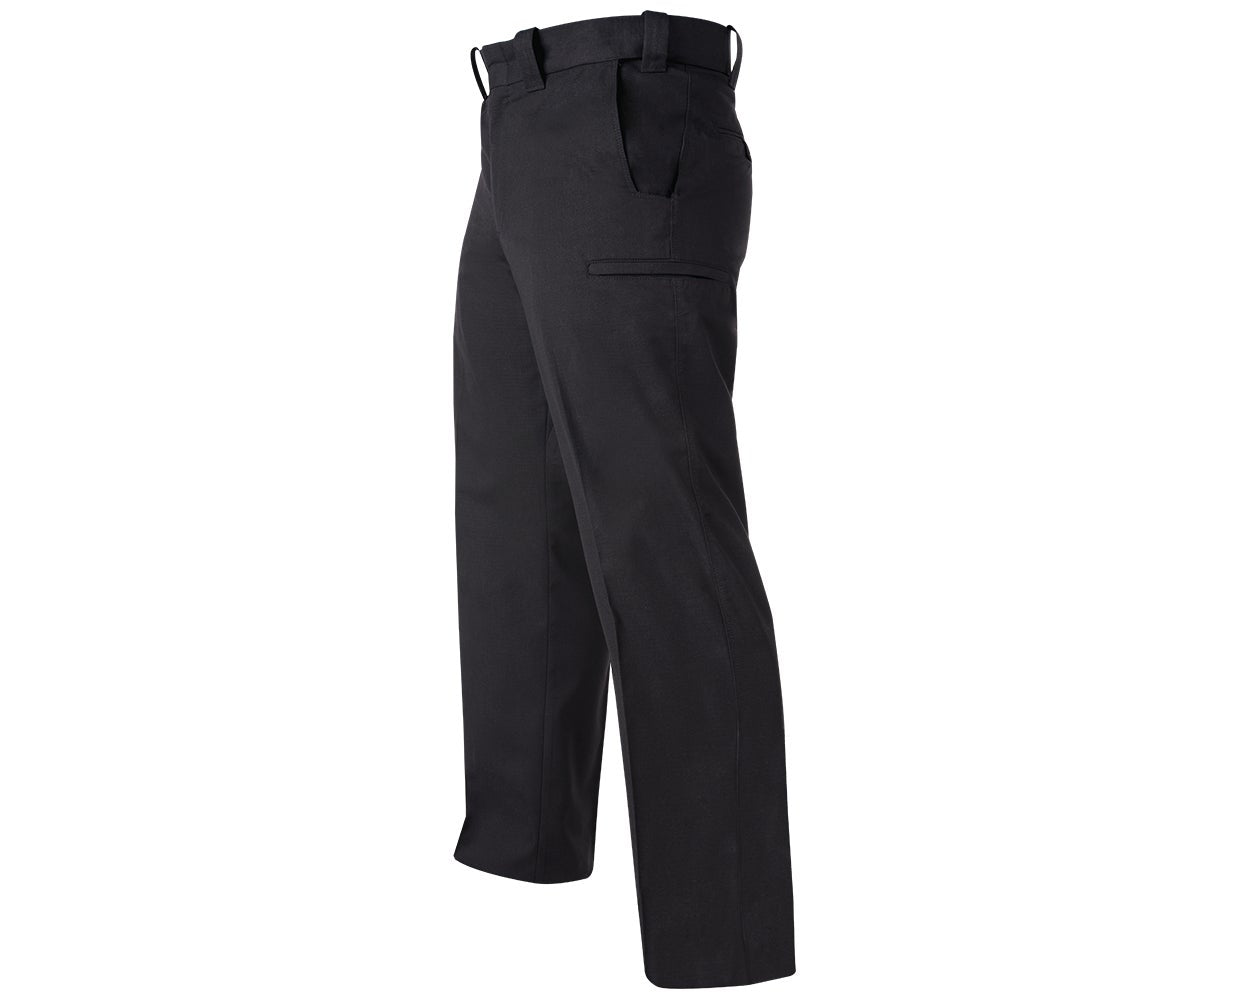 Flying Cross FX STAT Men's Class A Uniform Pants with 6 Pockets FX77400 - Newest Products